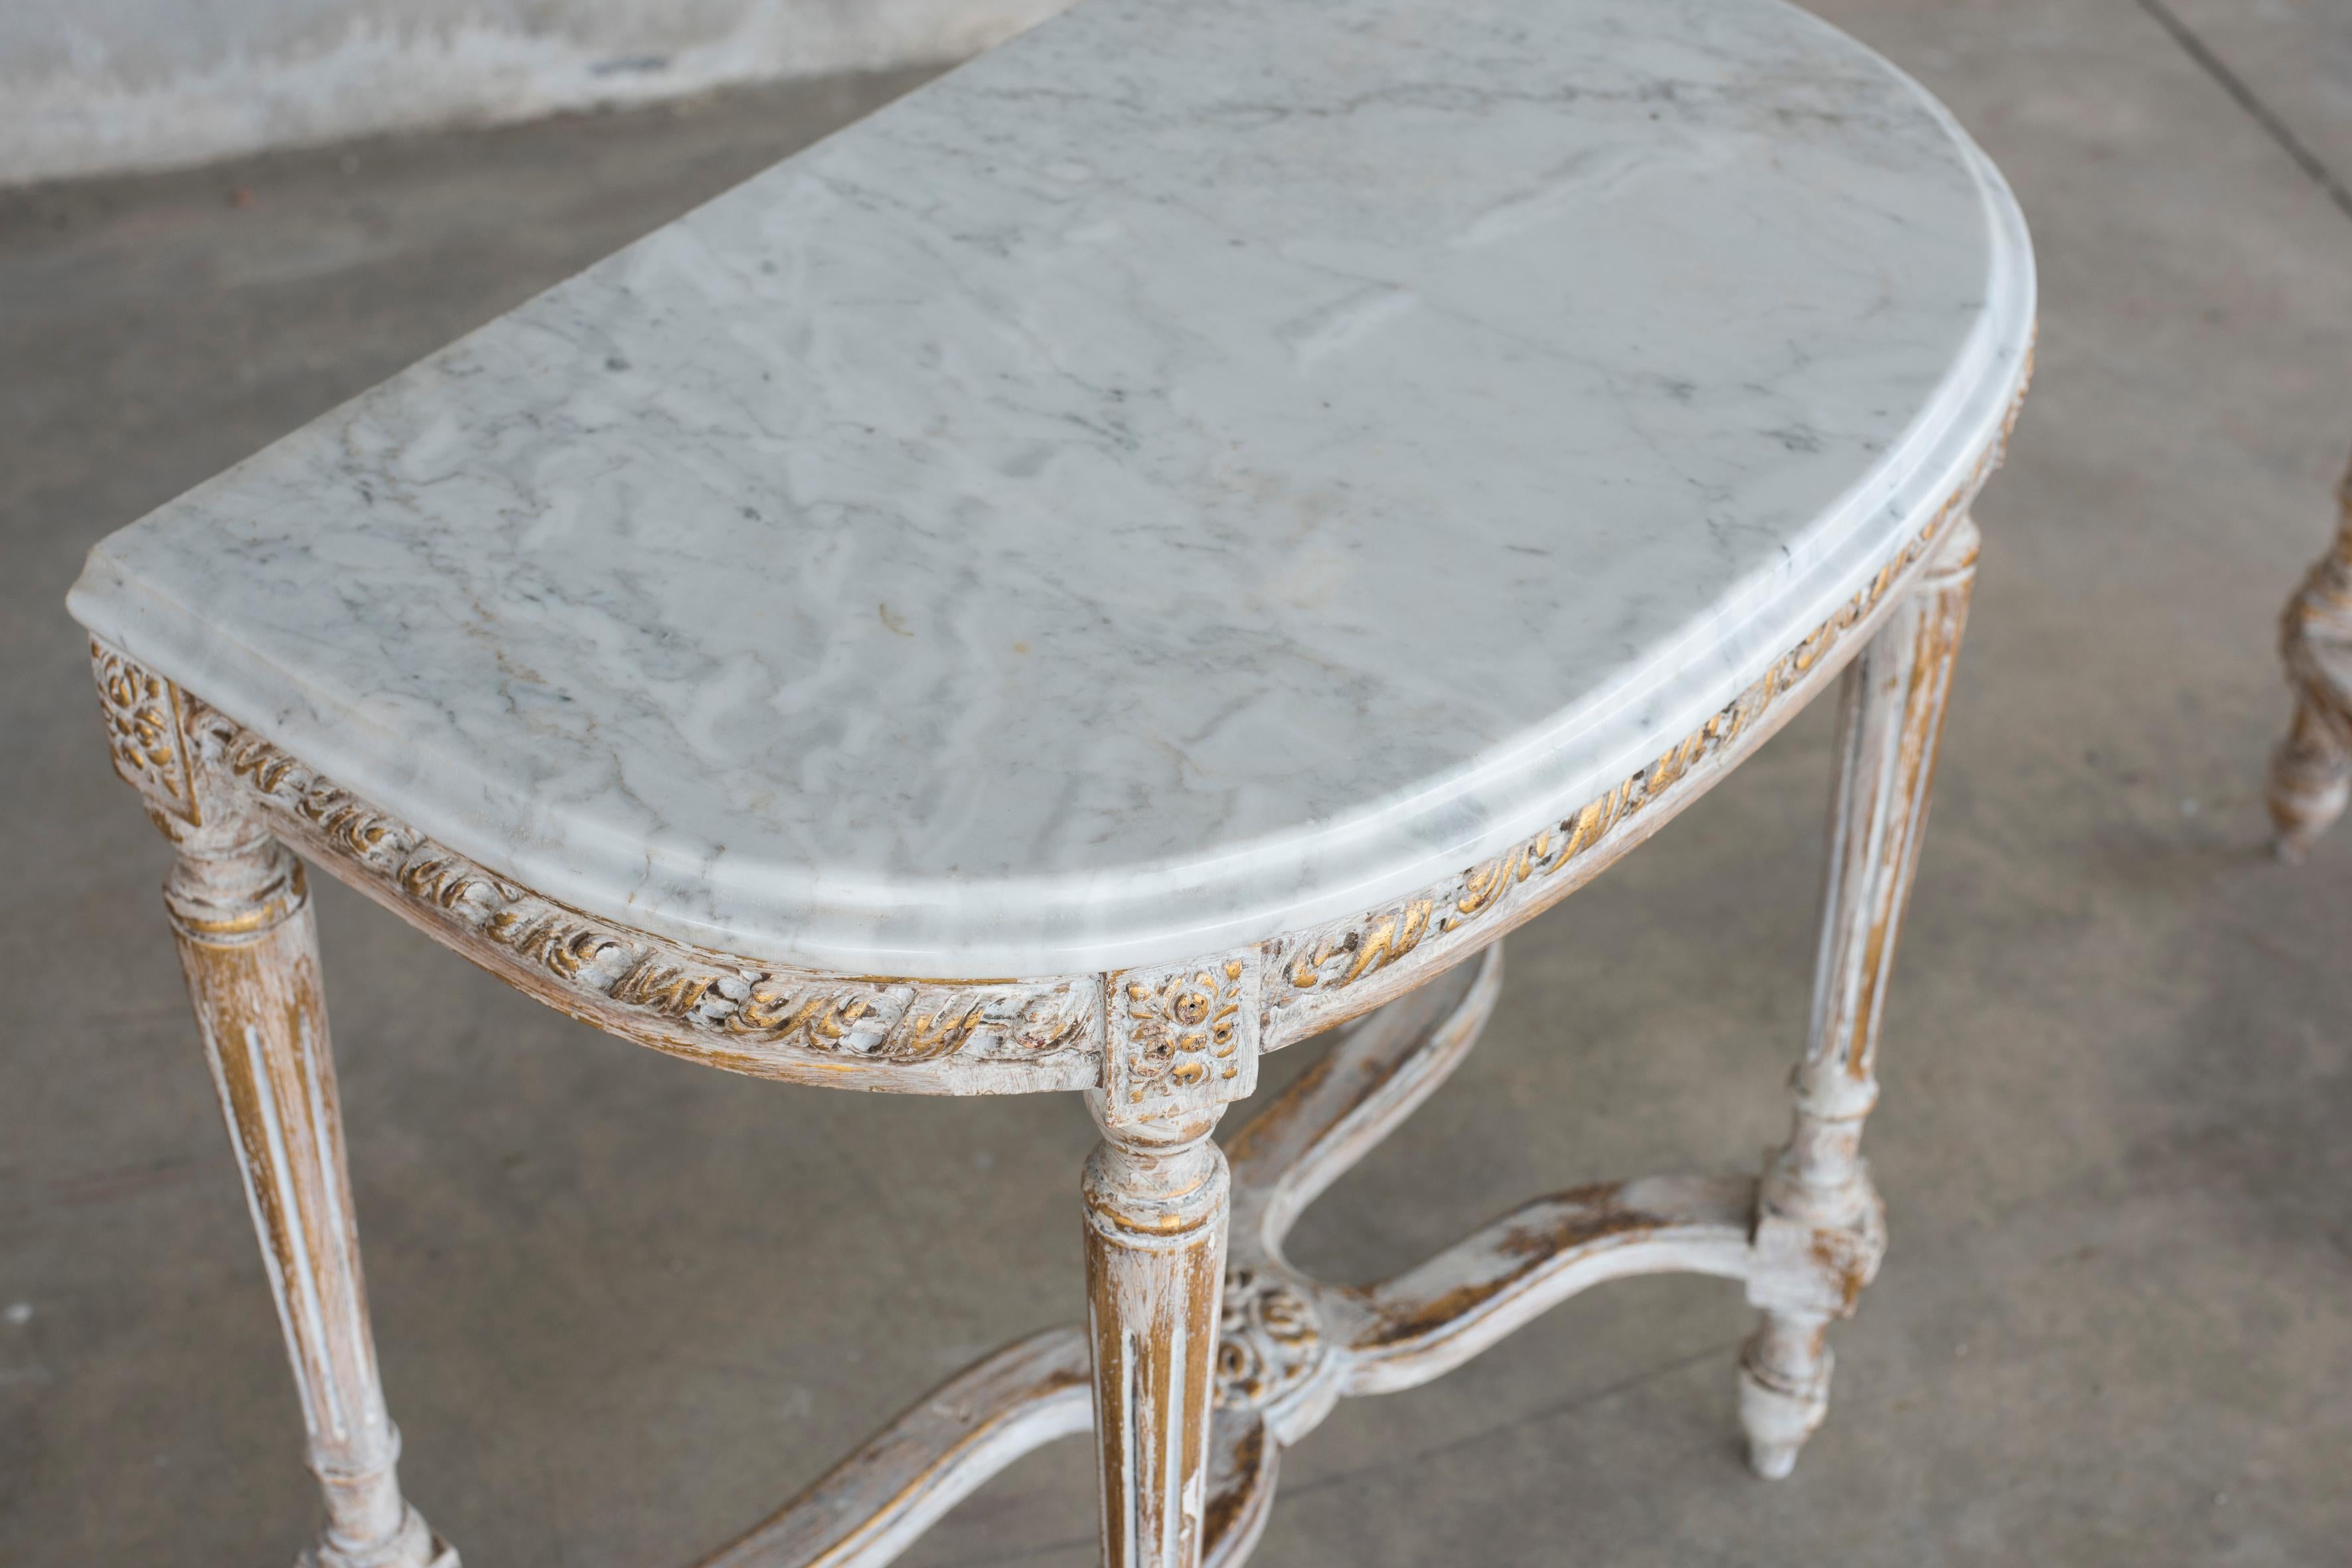 Pair of White lacquered Shabby Effect console tables with marble top in Louis XVI style.
Size of each table: W 65 cm, D 40 cm, H 63 cm.
Restored in conservative way.
Wood structure is in pinewood light wood. The marble is white Carrara marble.
A